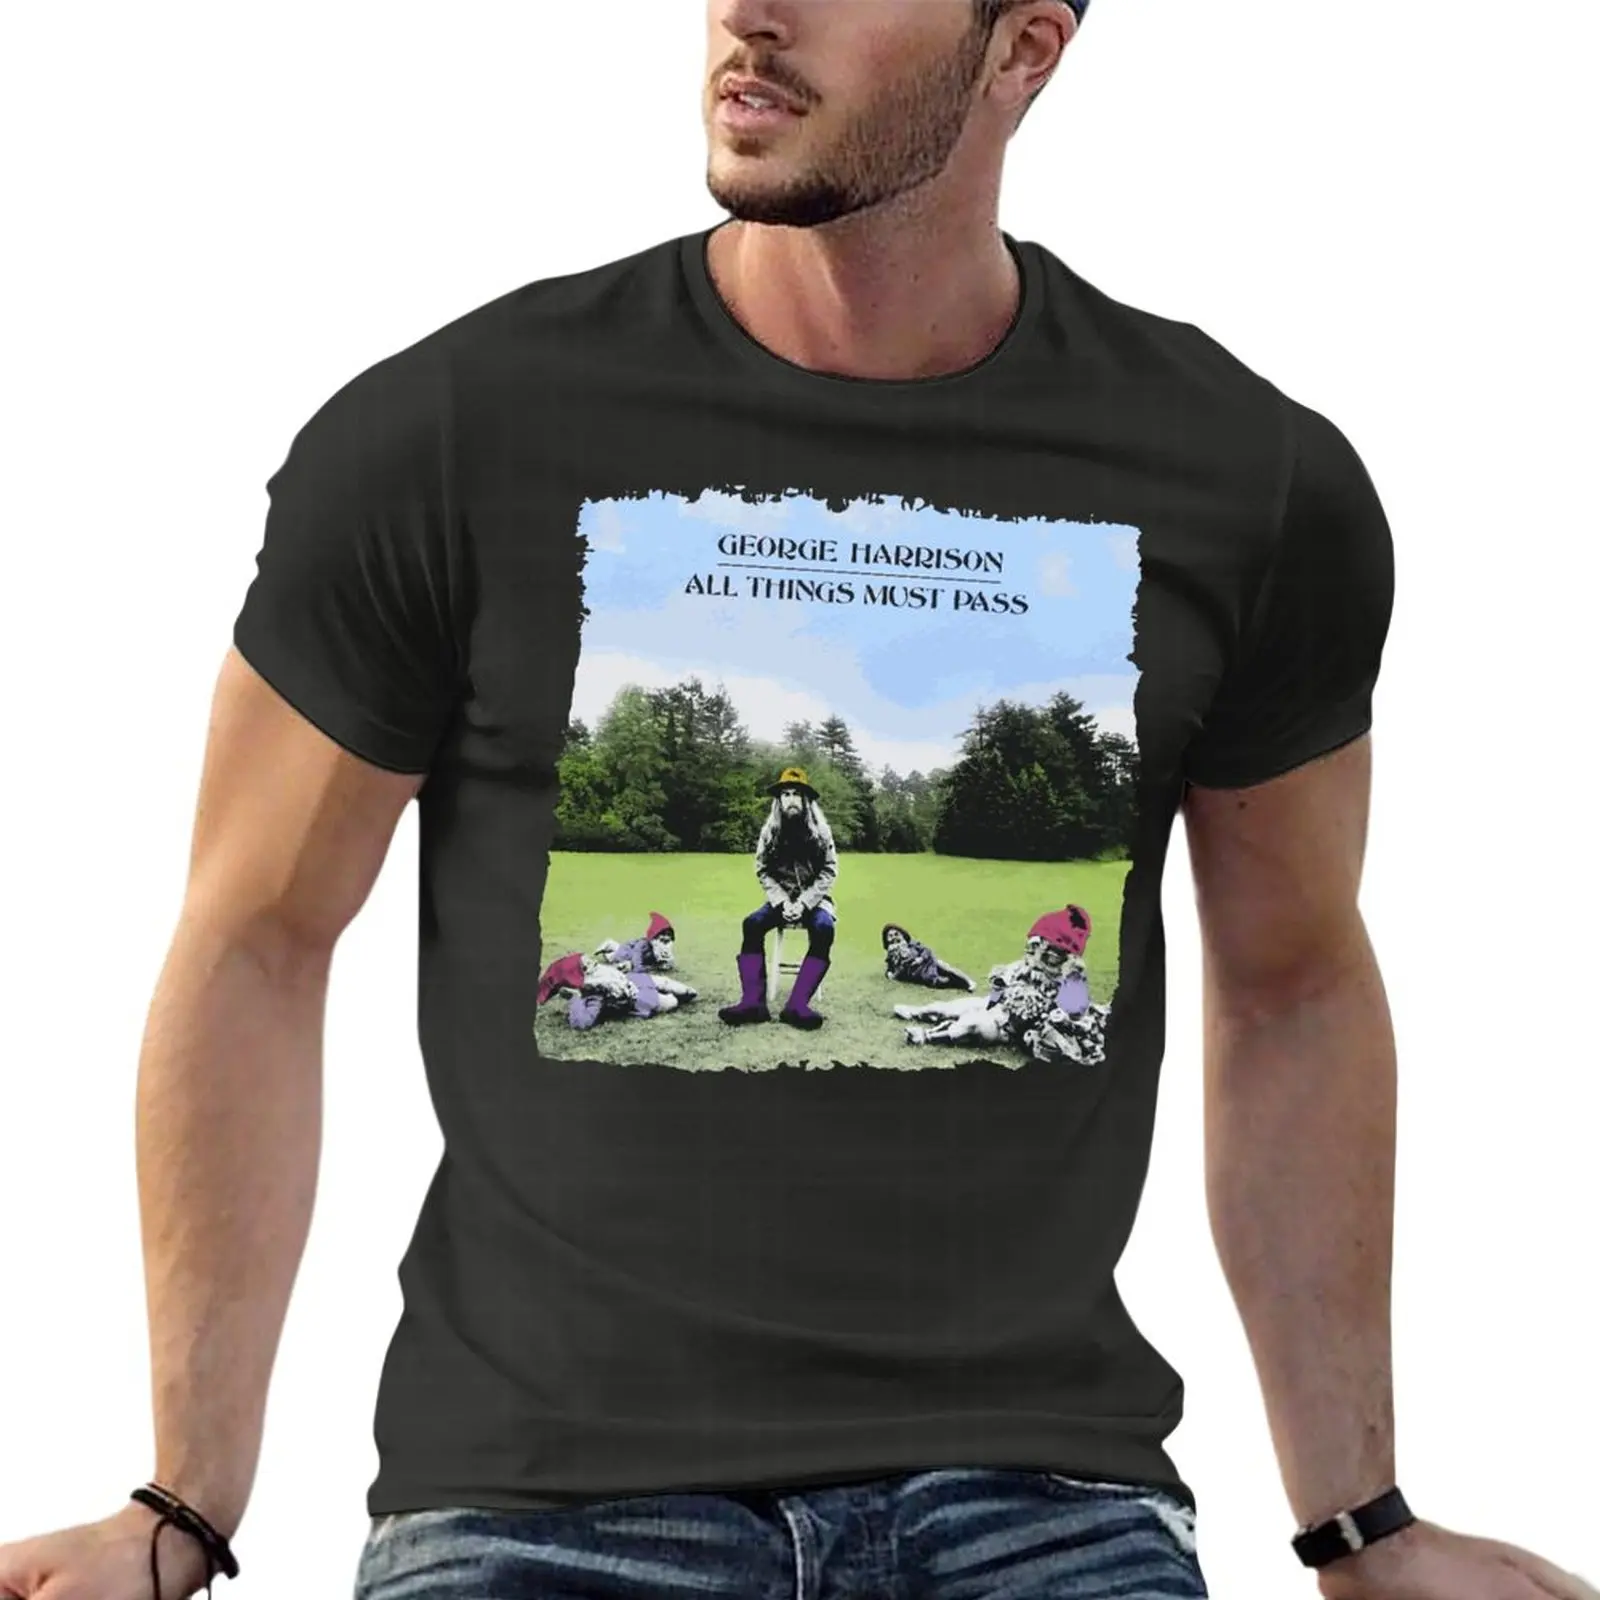 

George Harrison All Things Must Pass Oversize T-Shirt Personalized Mens Clothes 100% Cotton Streetwear Large Size Top Tee